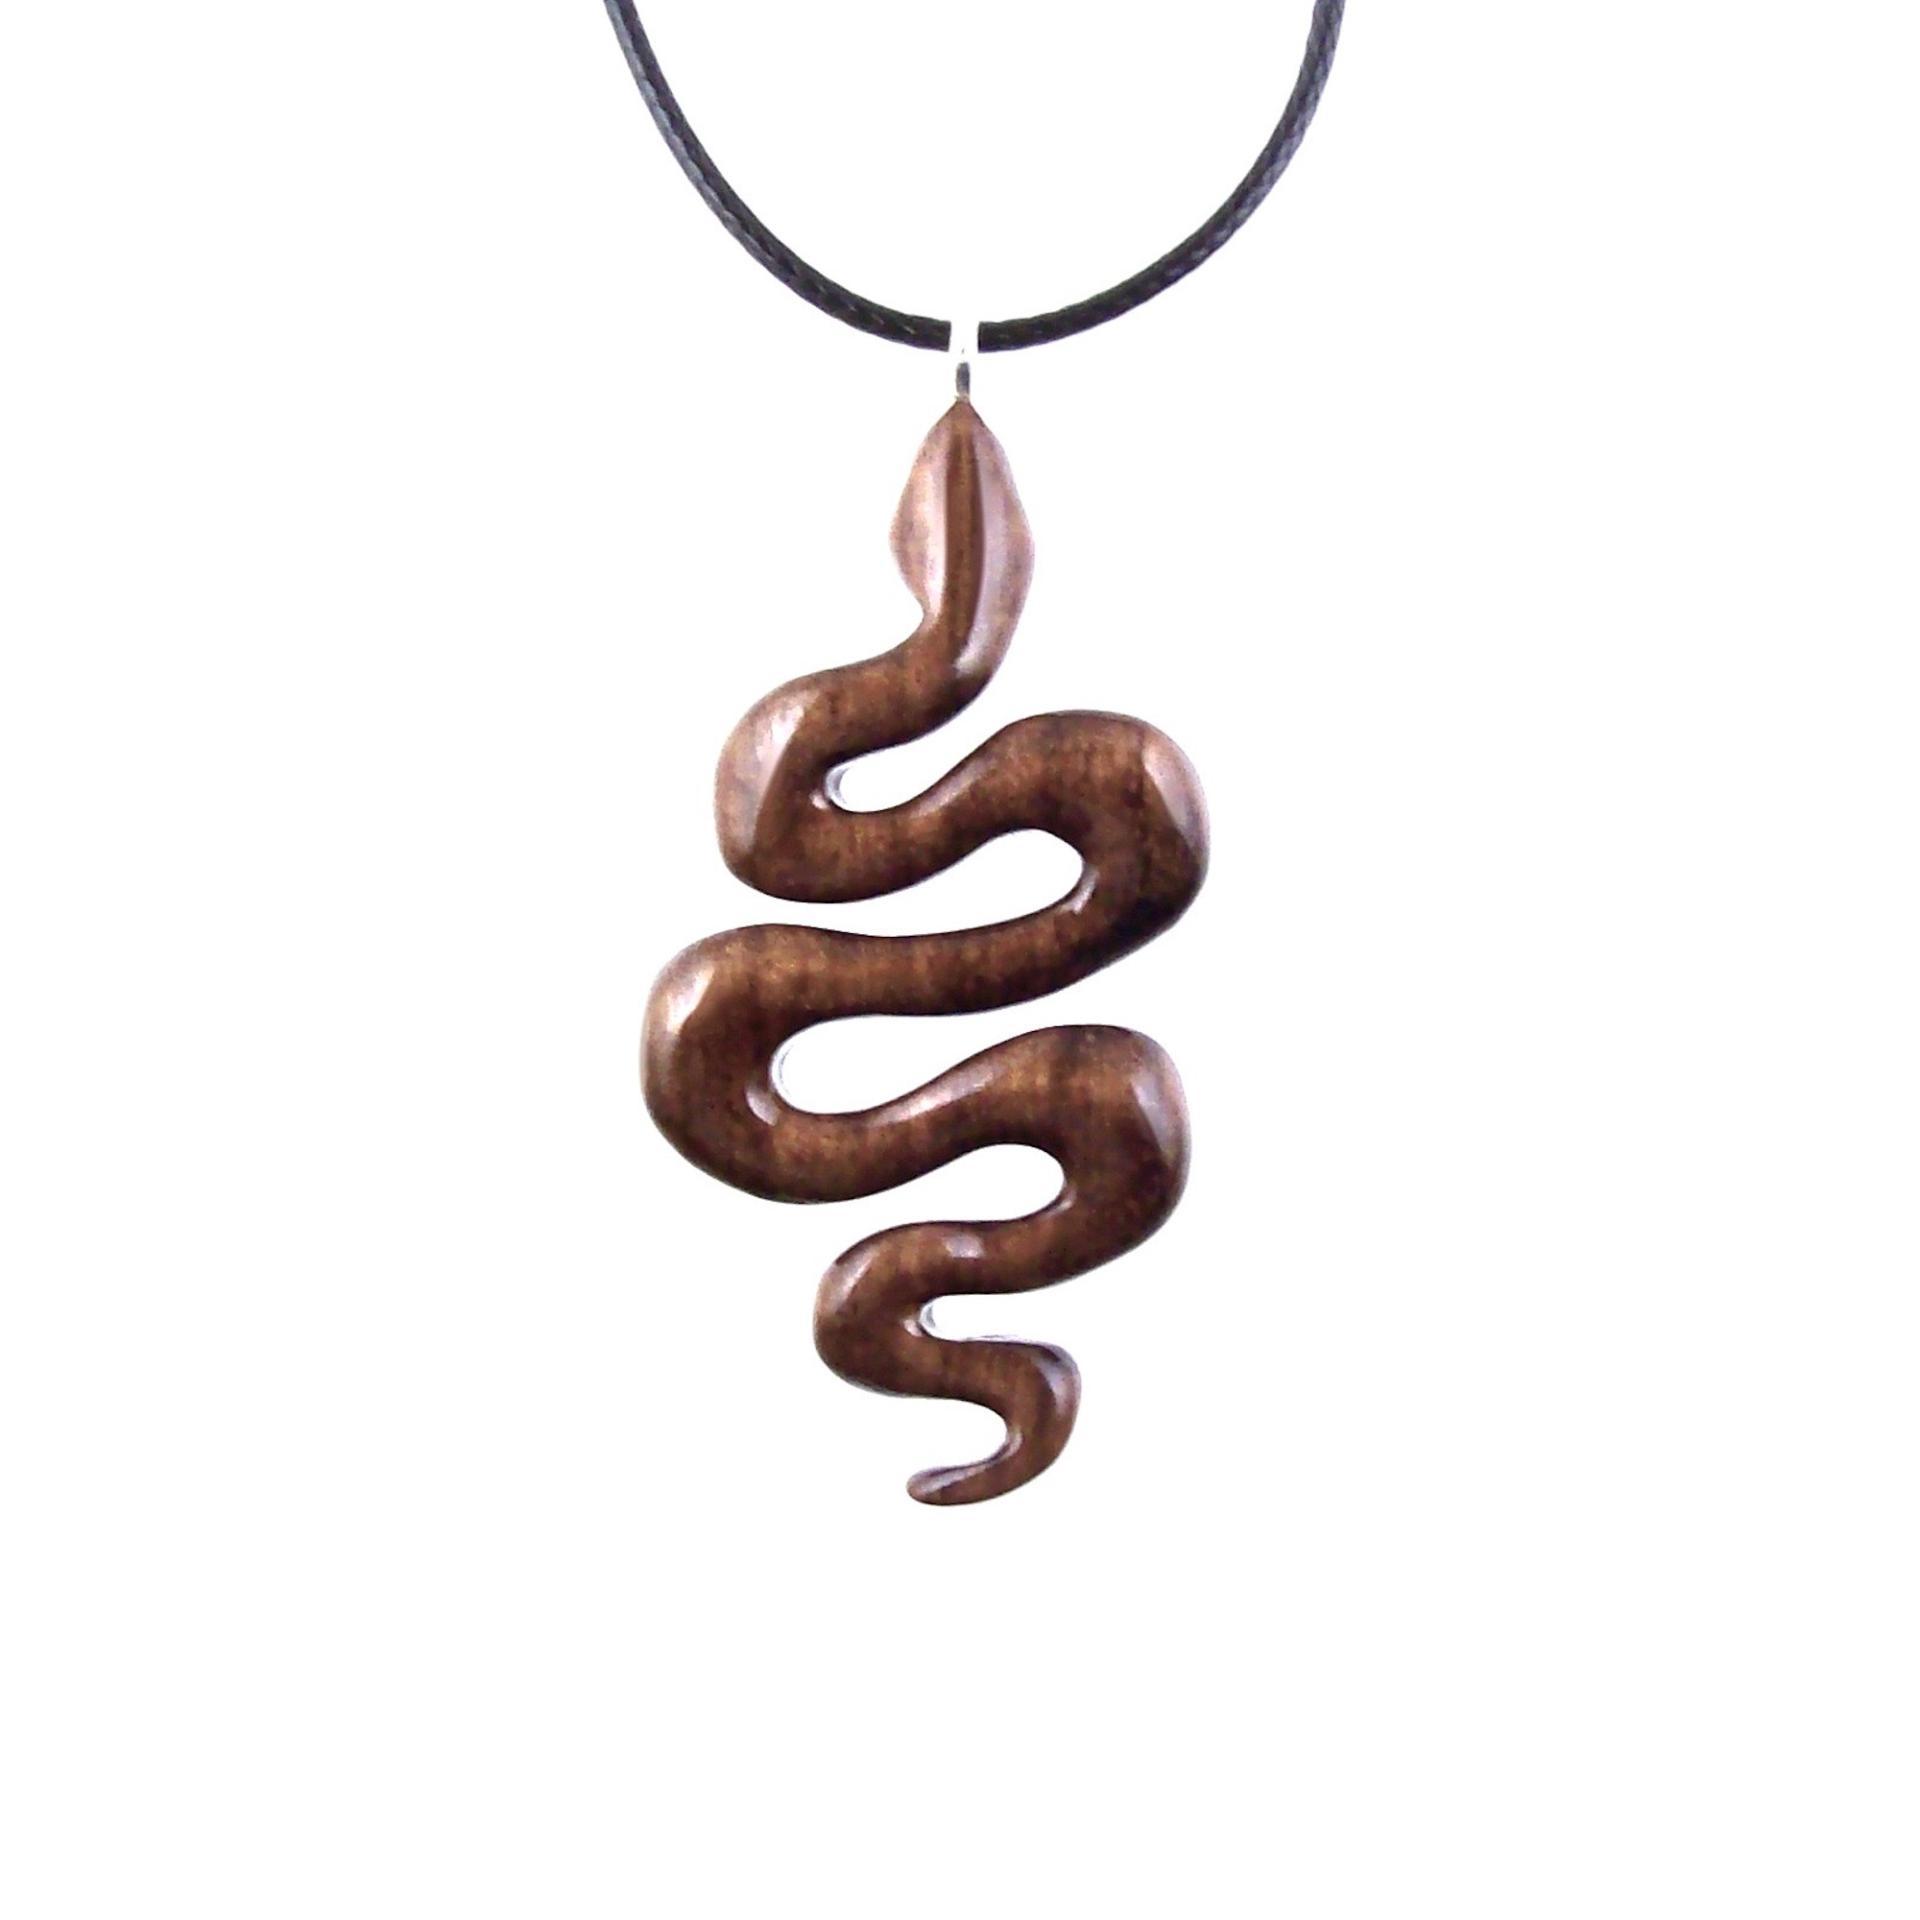 Snake Pendant, Hand Carved Wooden Snake Necklace, Wood Serpent Necklace, Reptile Jewelry, One of a Kind Gift for Her Him